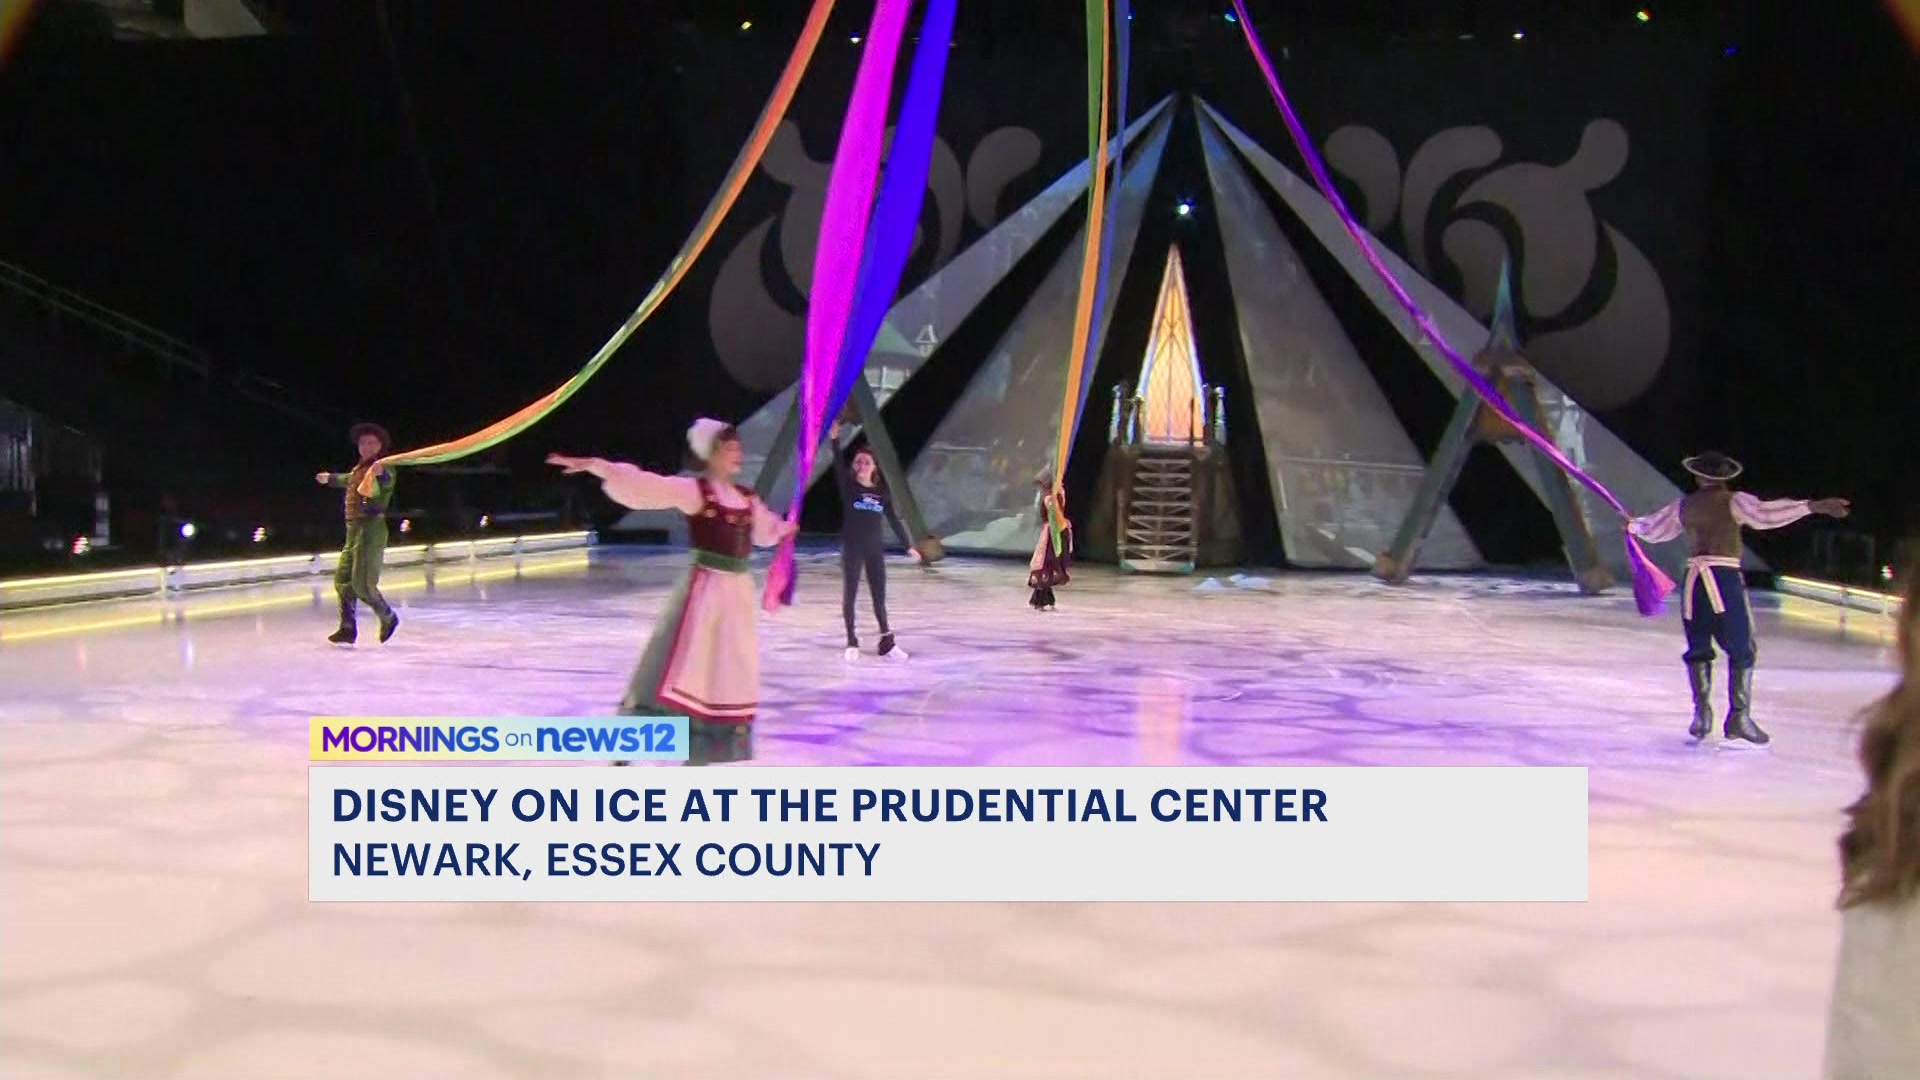 Disney On Ice presents Frozen and Encanto show at Newark Prudential Center